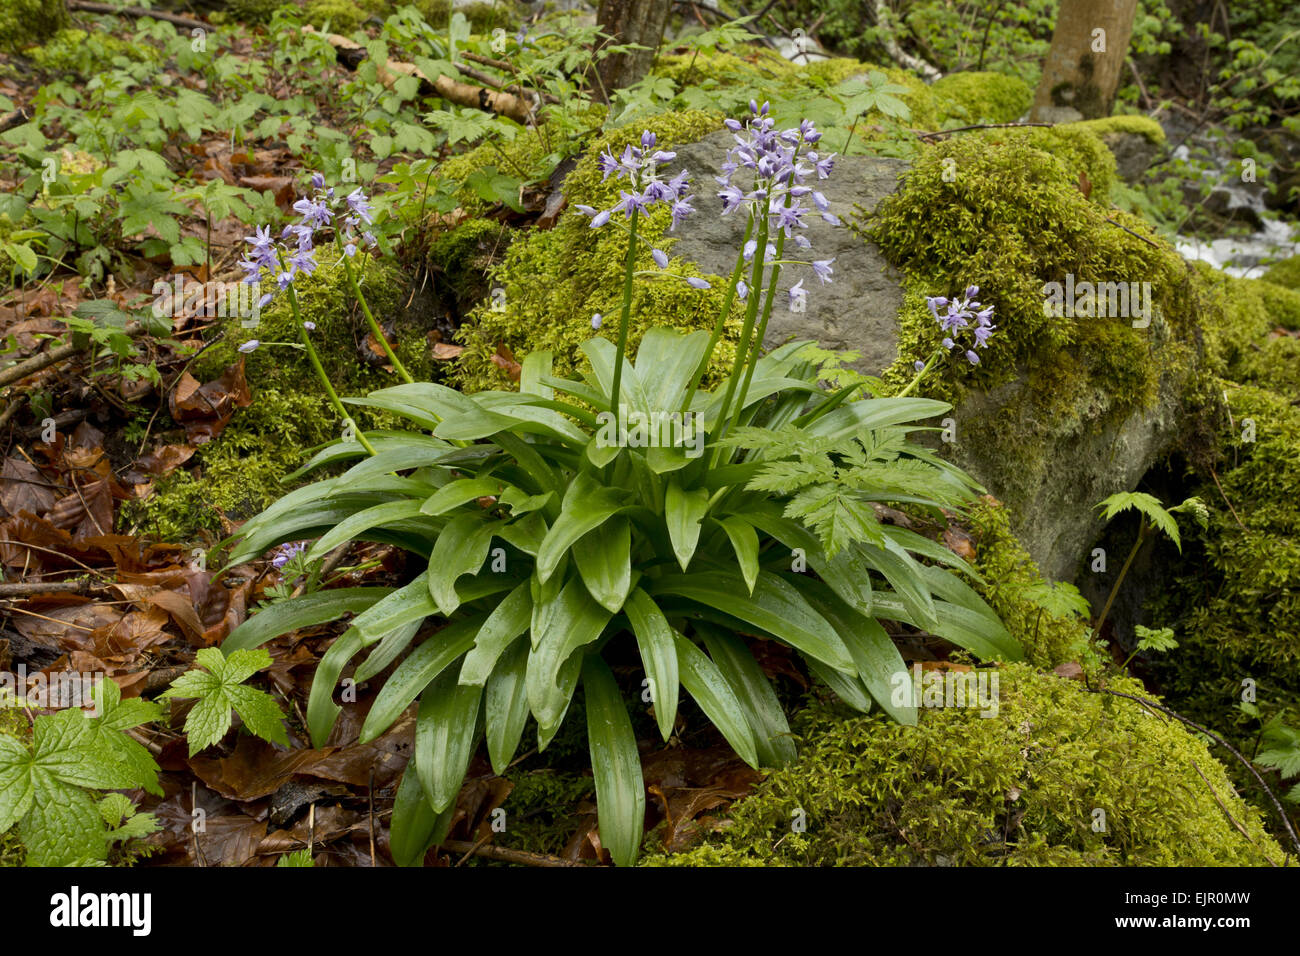 Pyrenean Squill (Scilla liliohyacinthus) flowering, growing in woodland, French Pyrenees, France, May Stock Photo